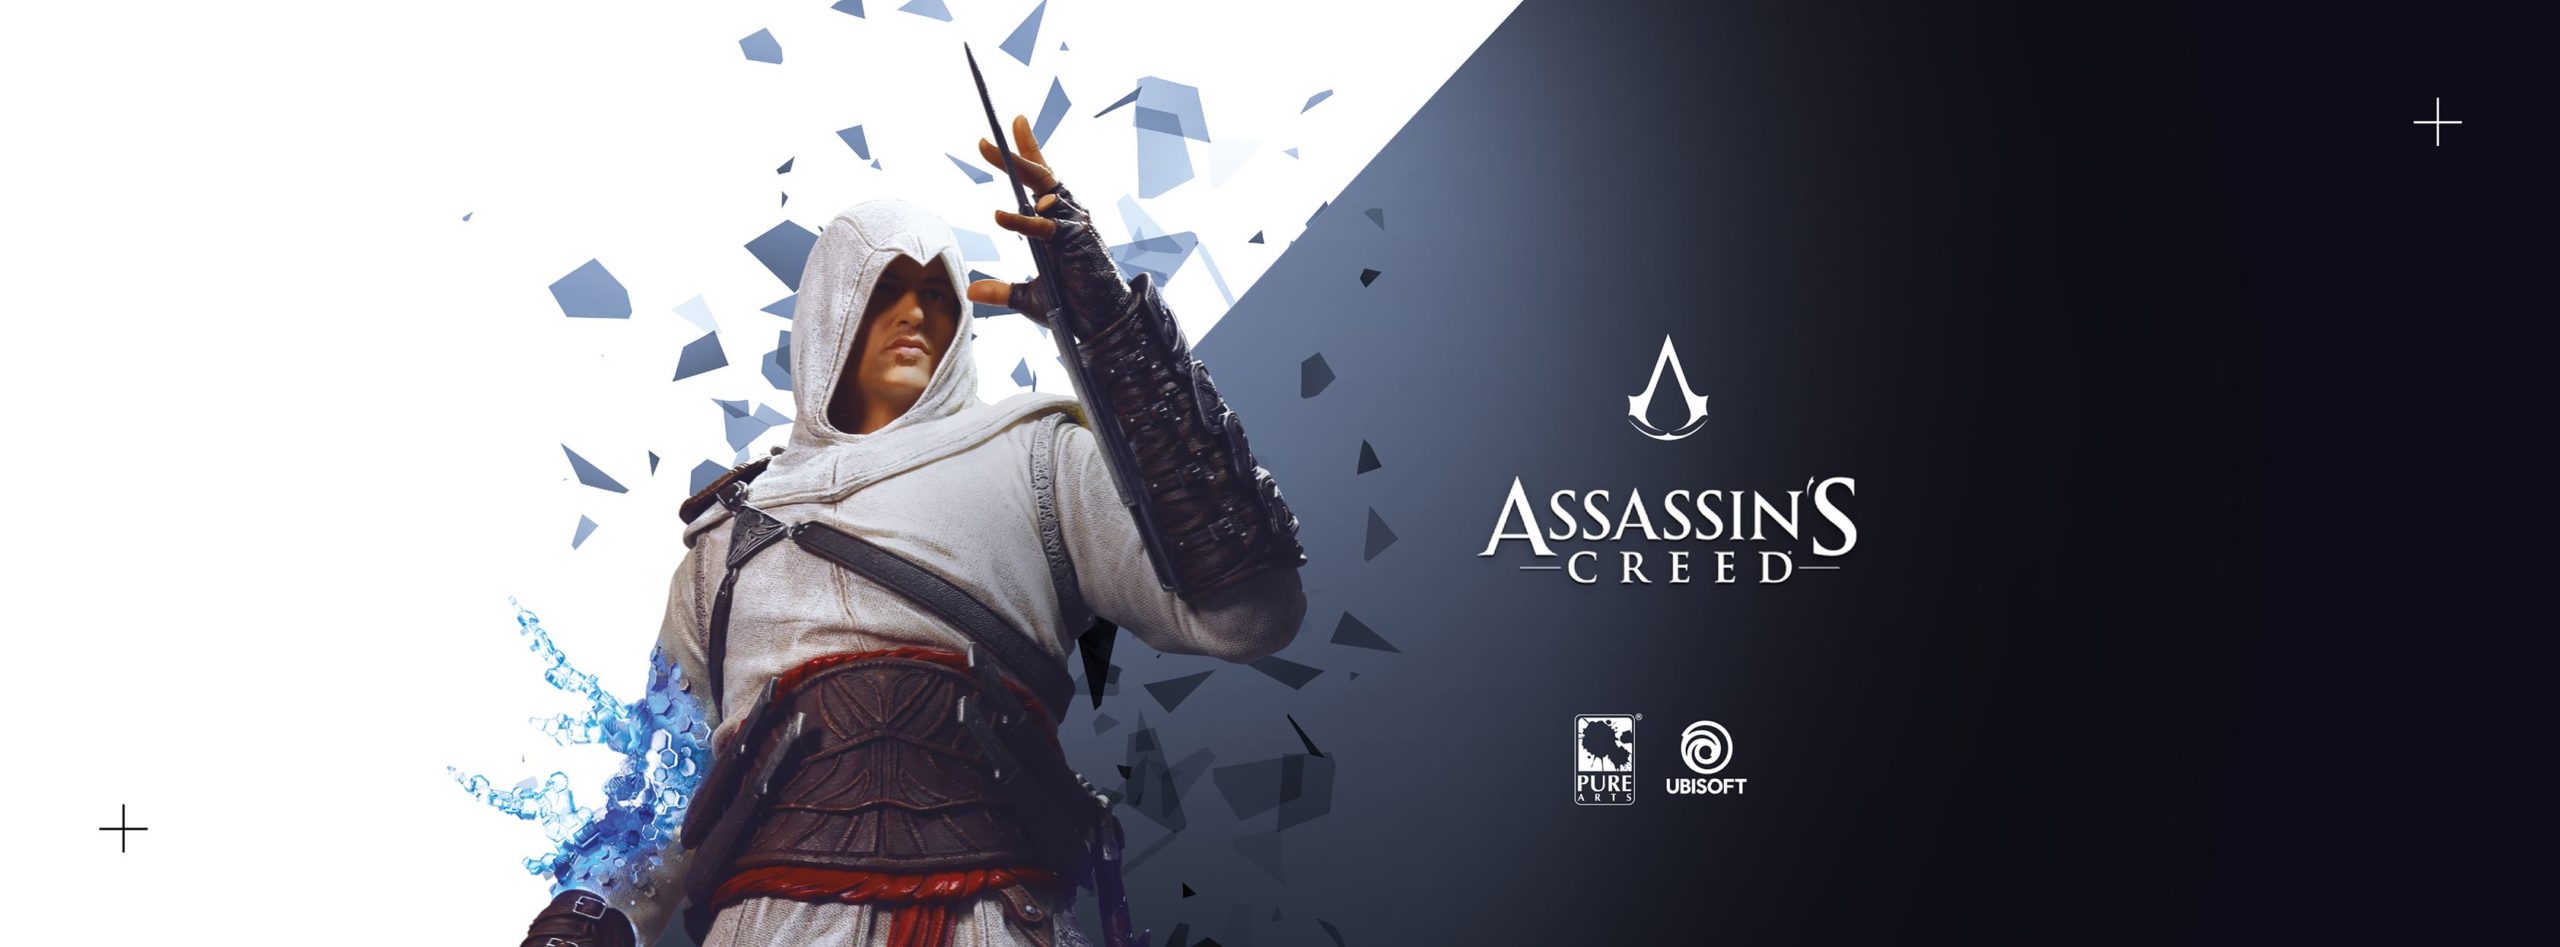  ASSASSIN’S CREED : ANIMUS ALTAIR